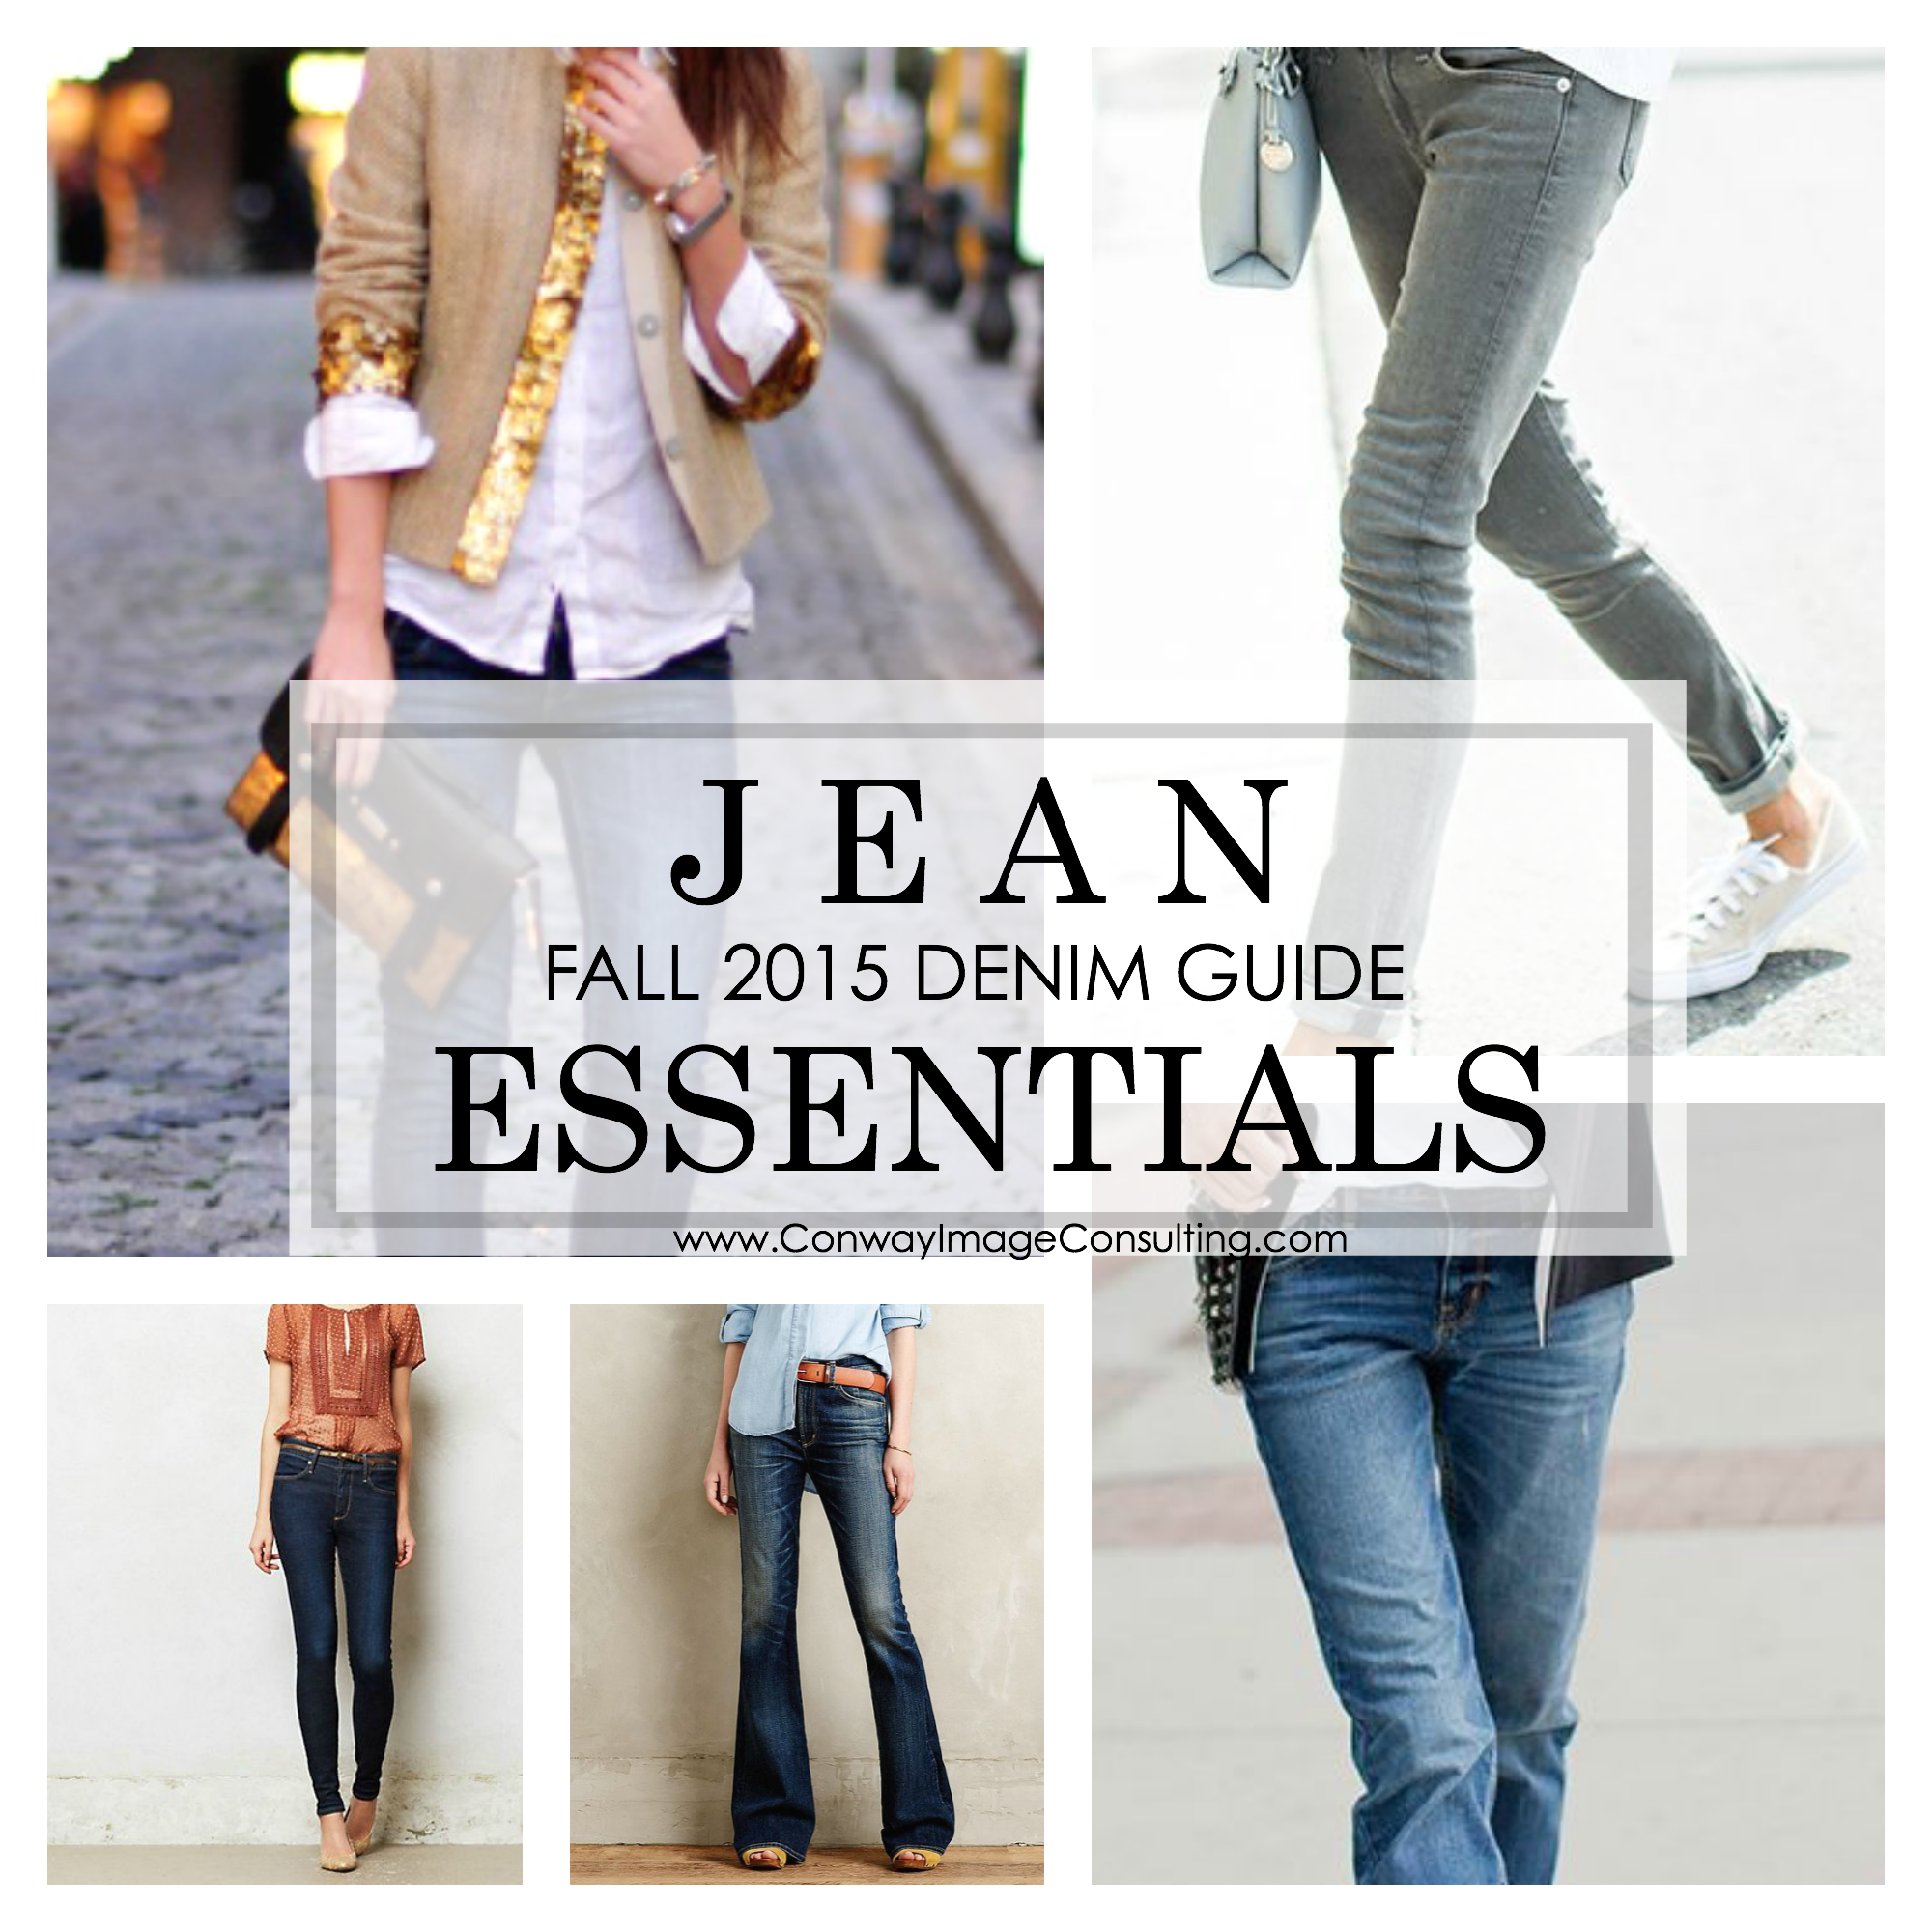  Jean Essentials - Fall 2015 Denim Guide by Conway Image Consulting